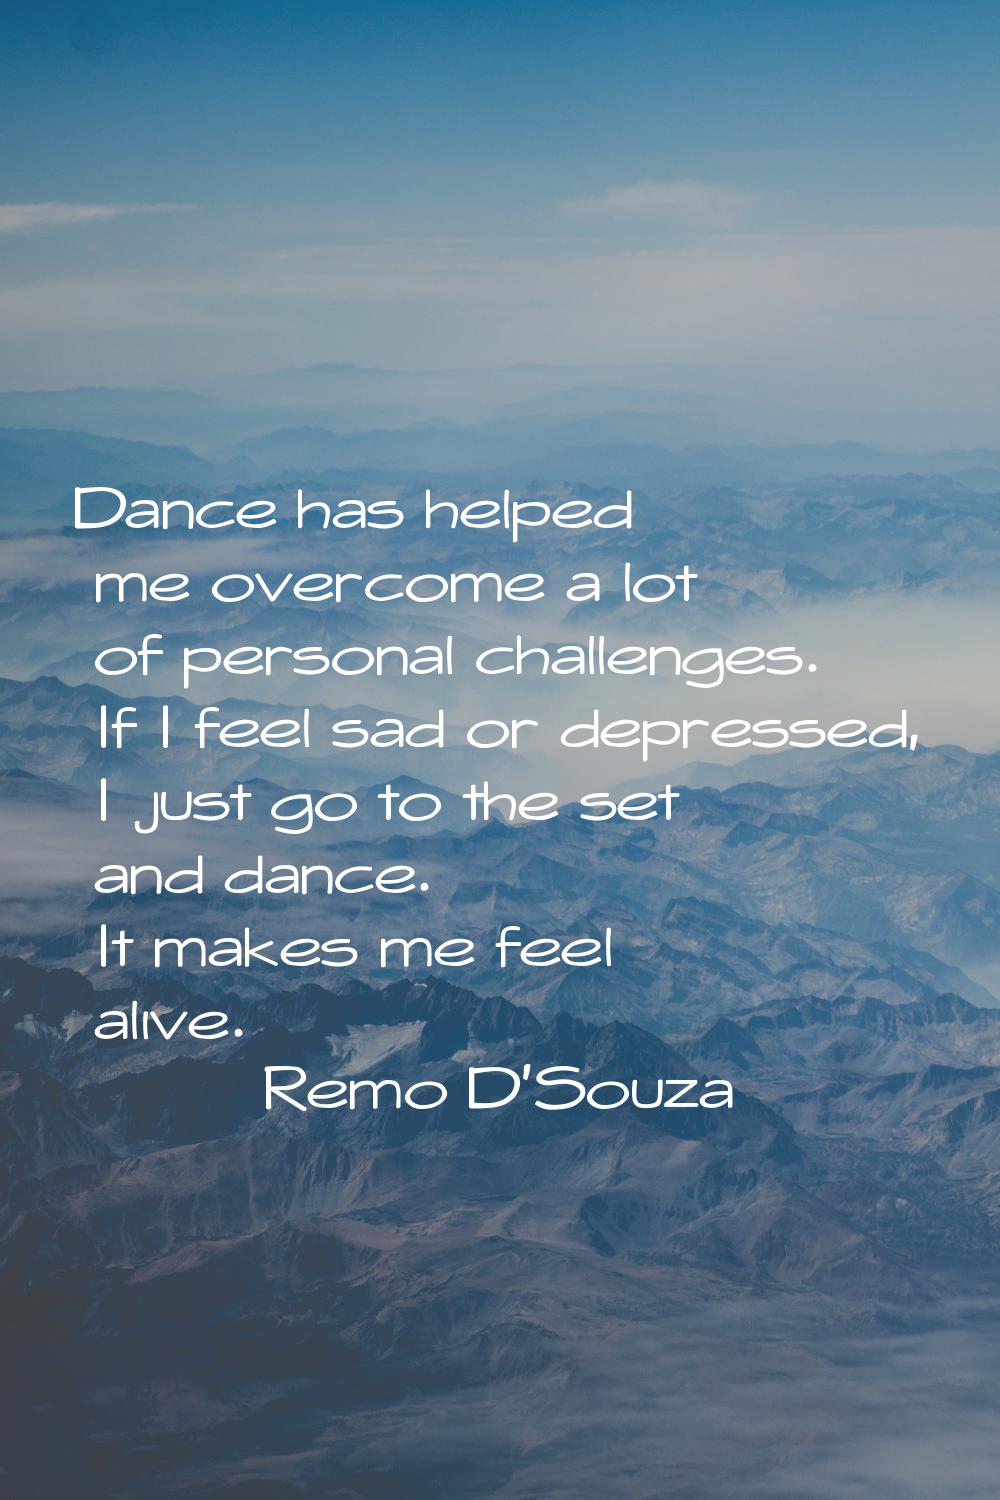 Dance has helped me overcome a lot of personal challenges. If I feel sad or depressed, I just go to